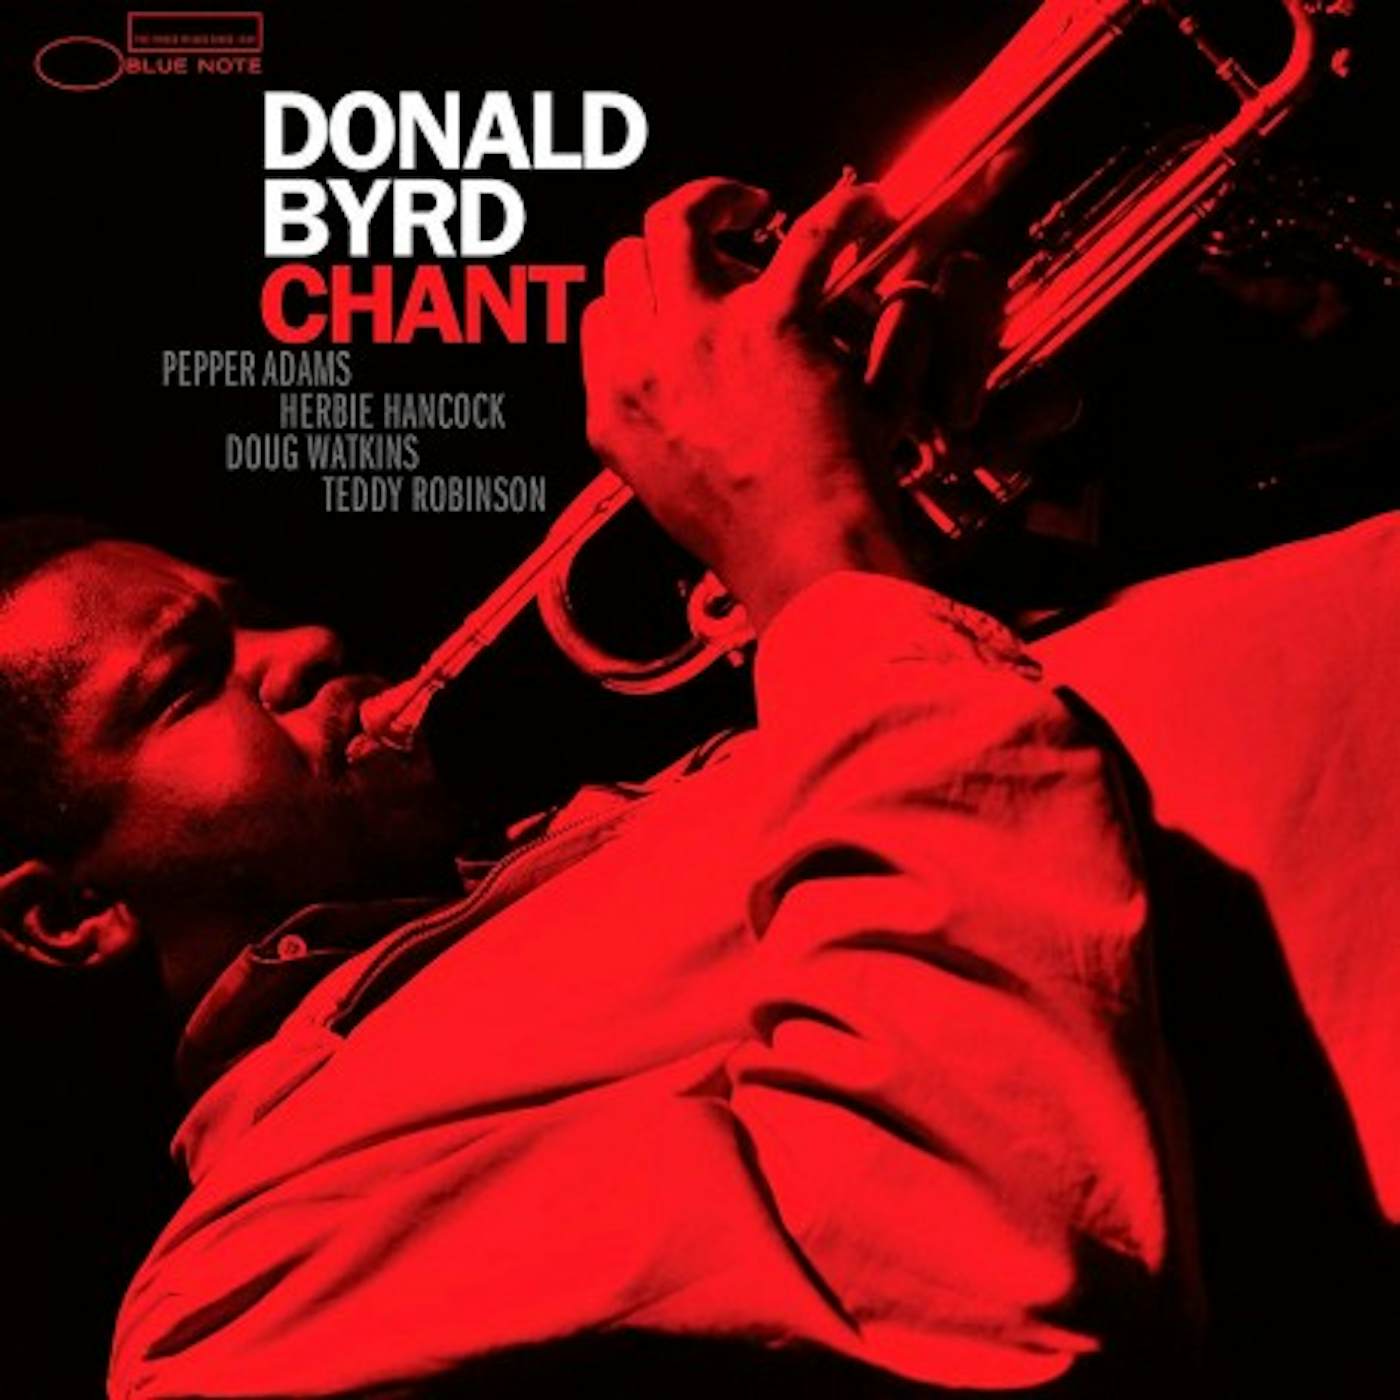 Donald Byrd CHANT (BLUE NOTE TONE POET SERIES) Vinyl Record